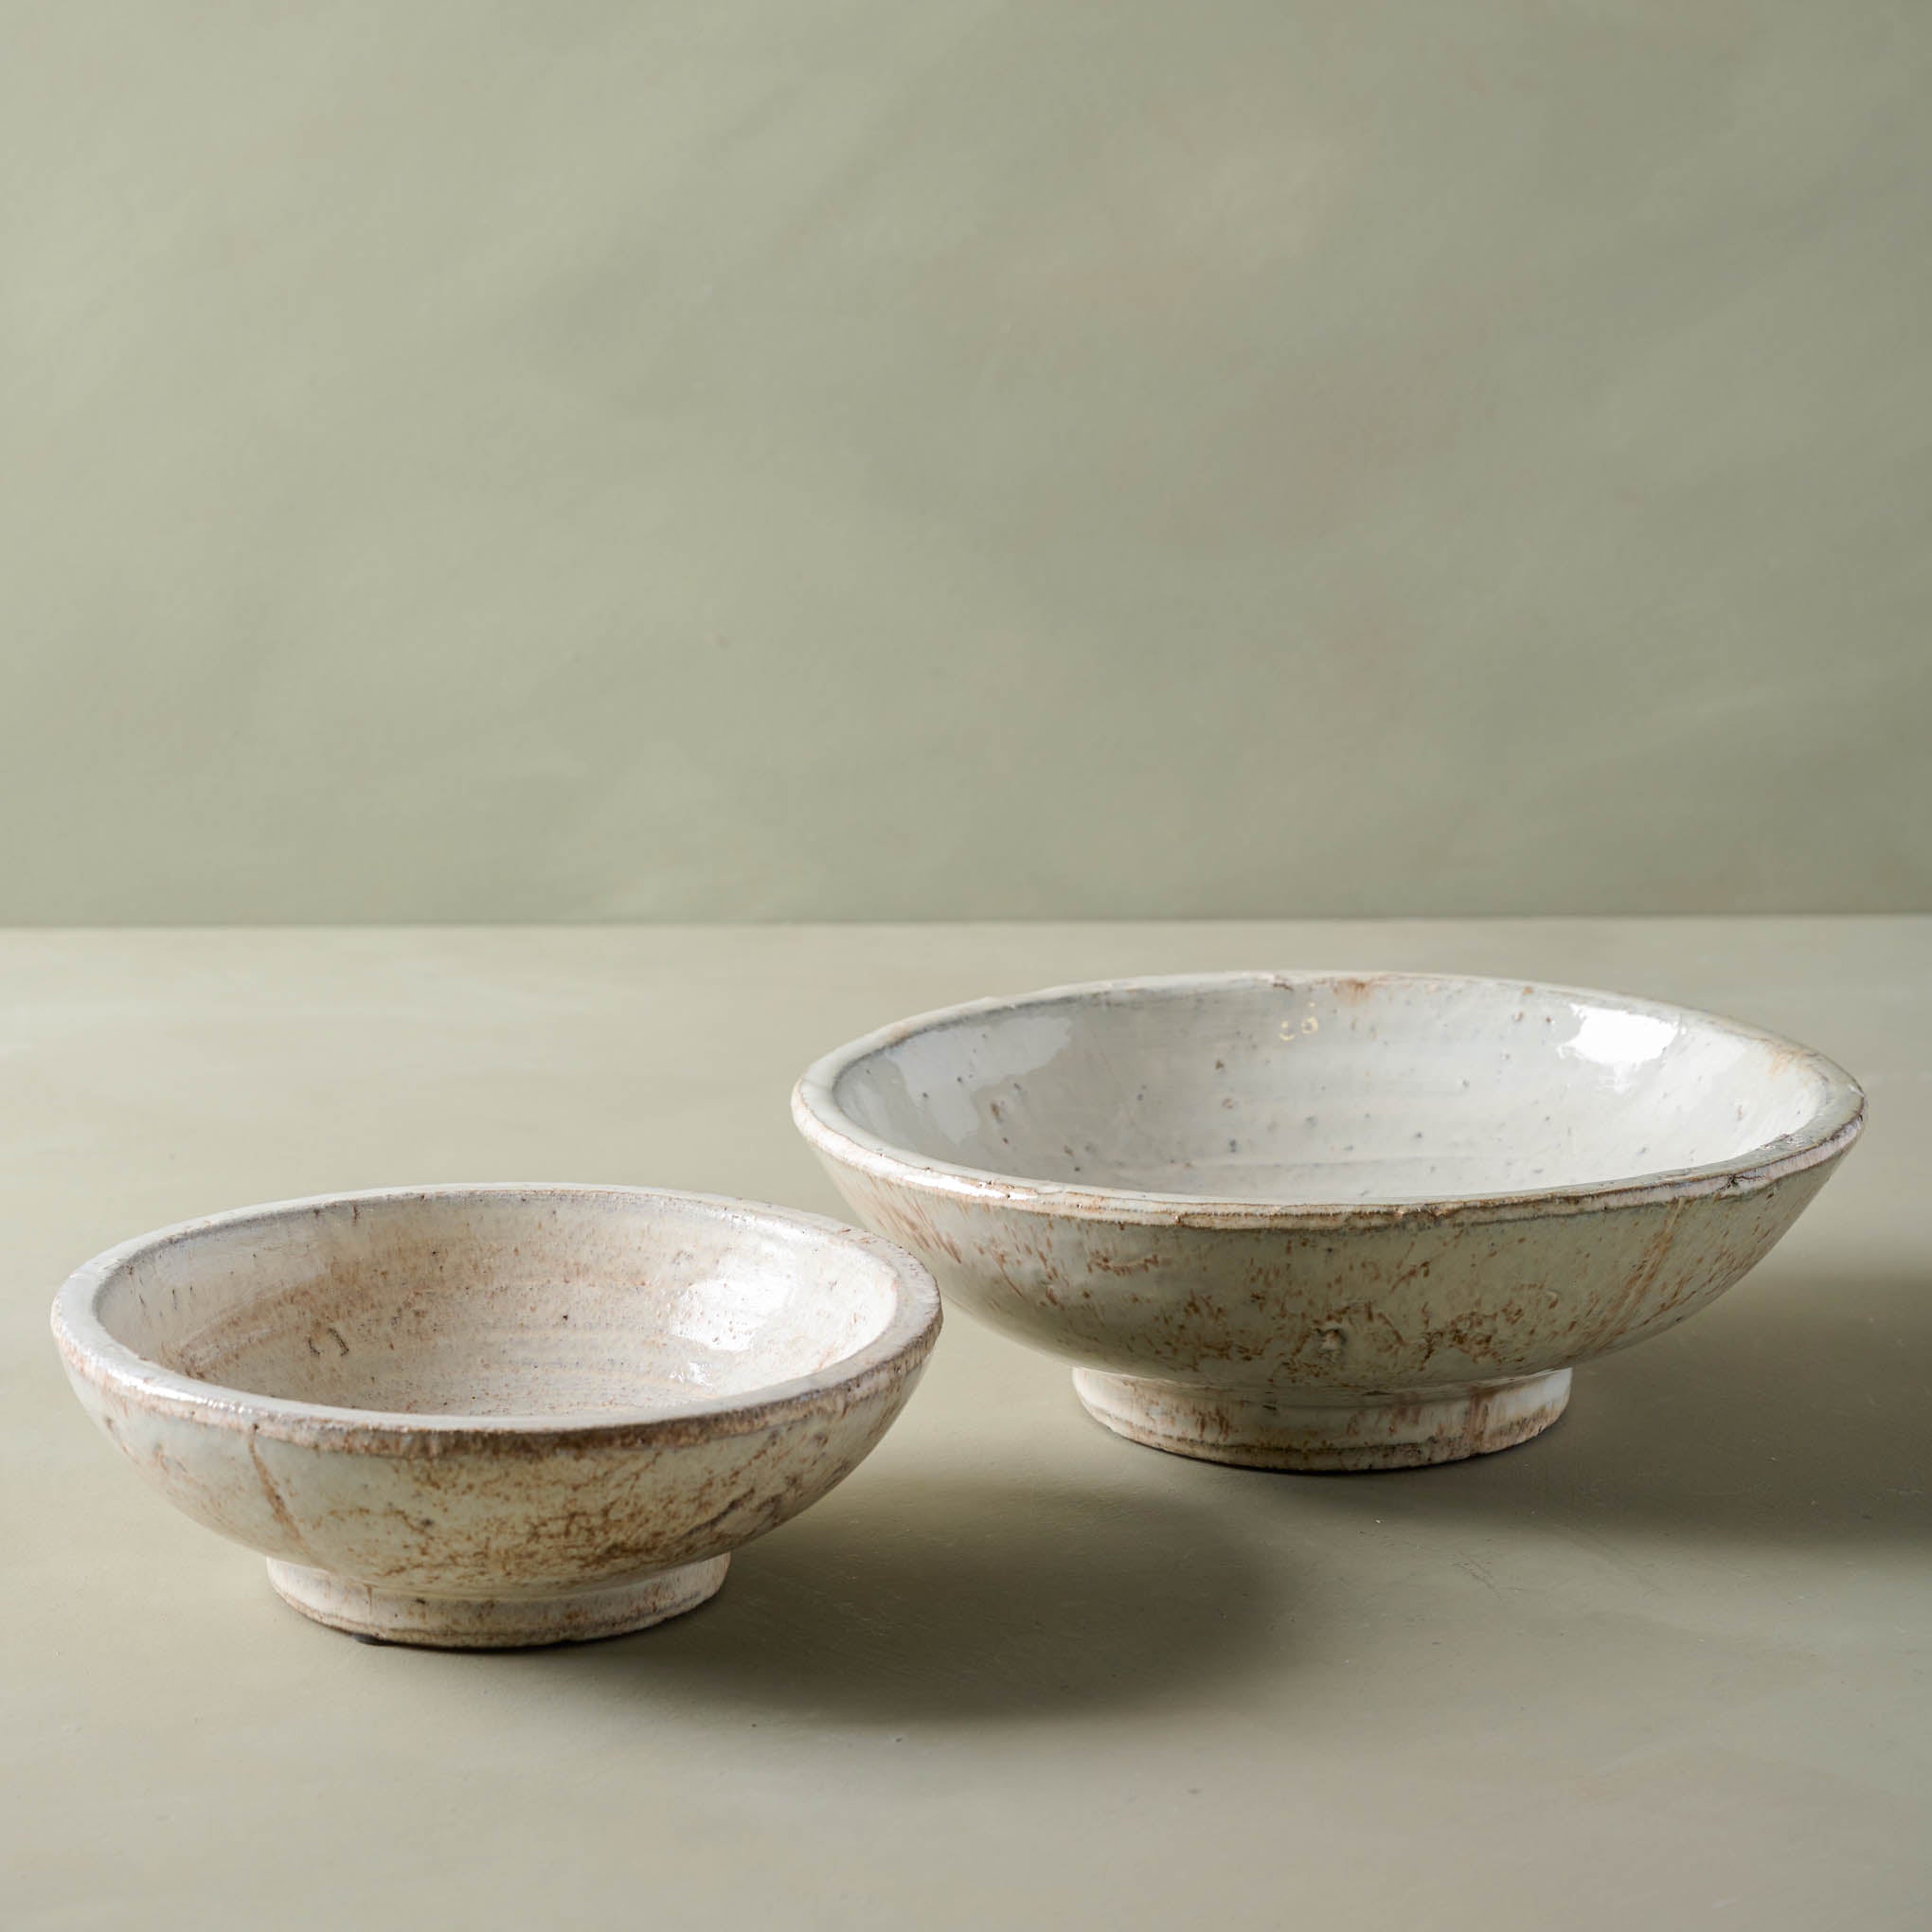 Large and small sizes of rustic cream accent bowl Items range from $16.00 to $30.00